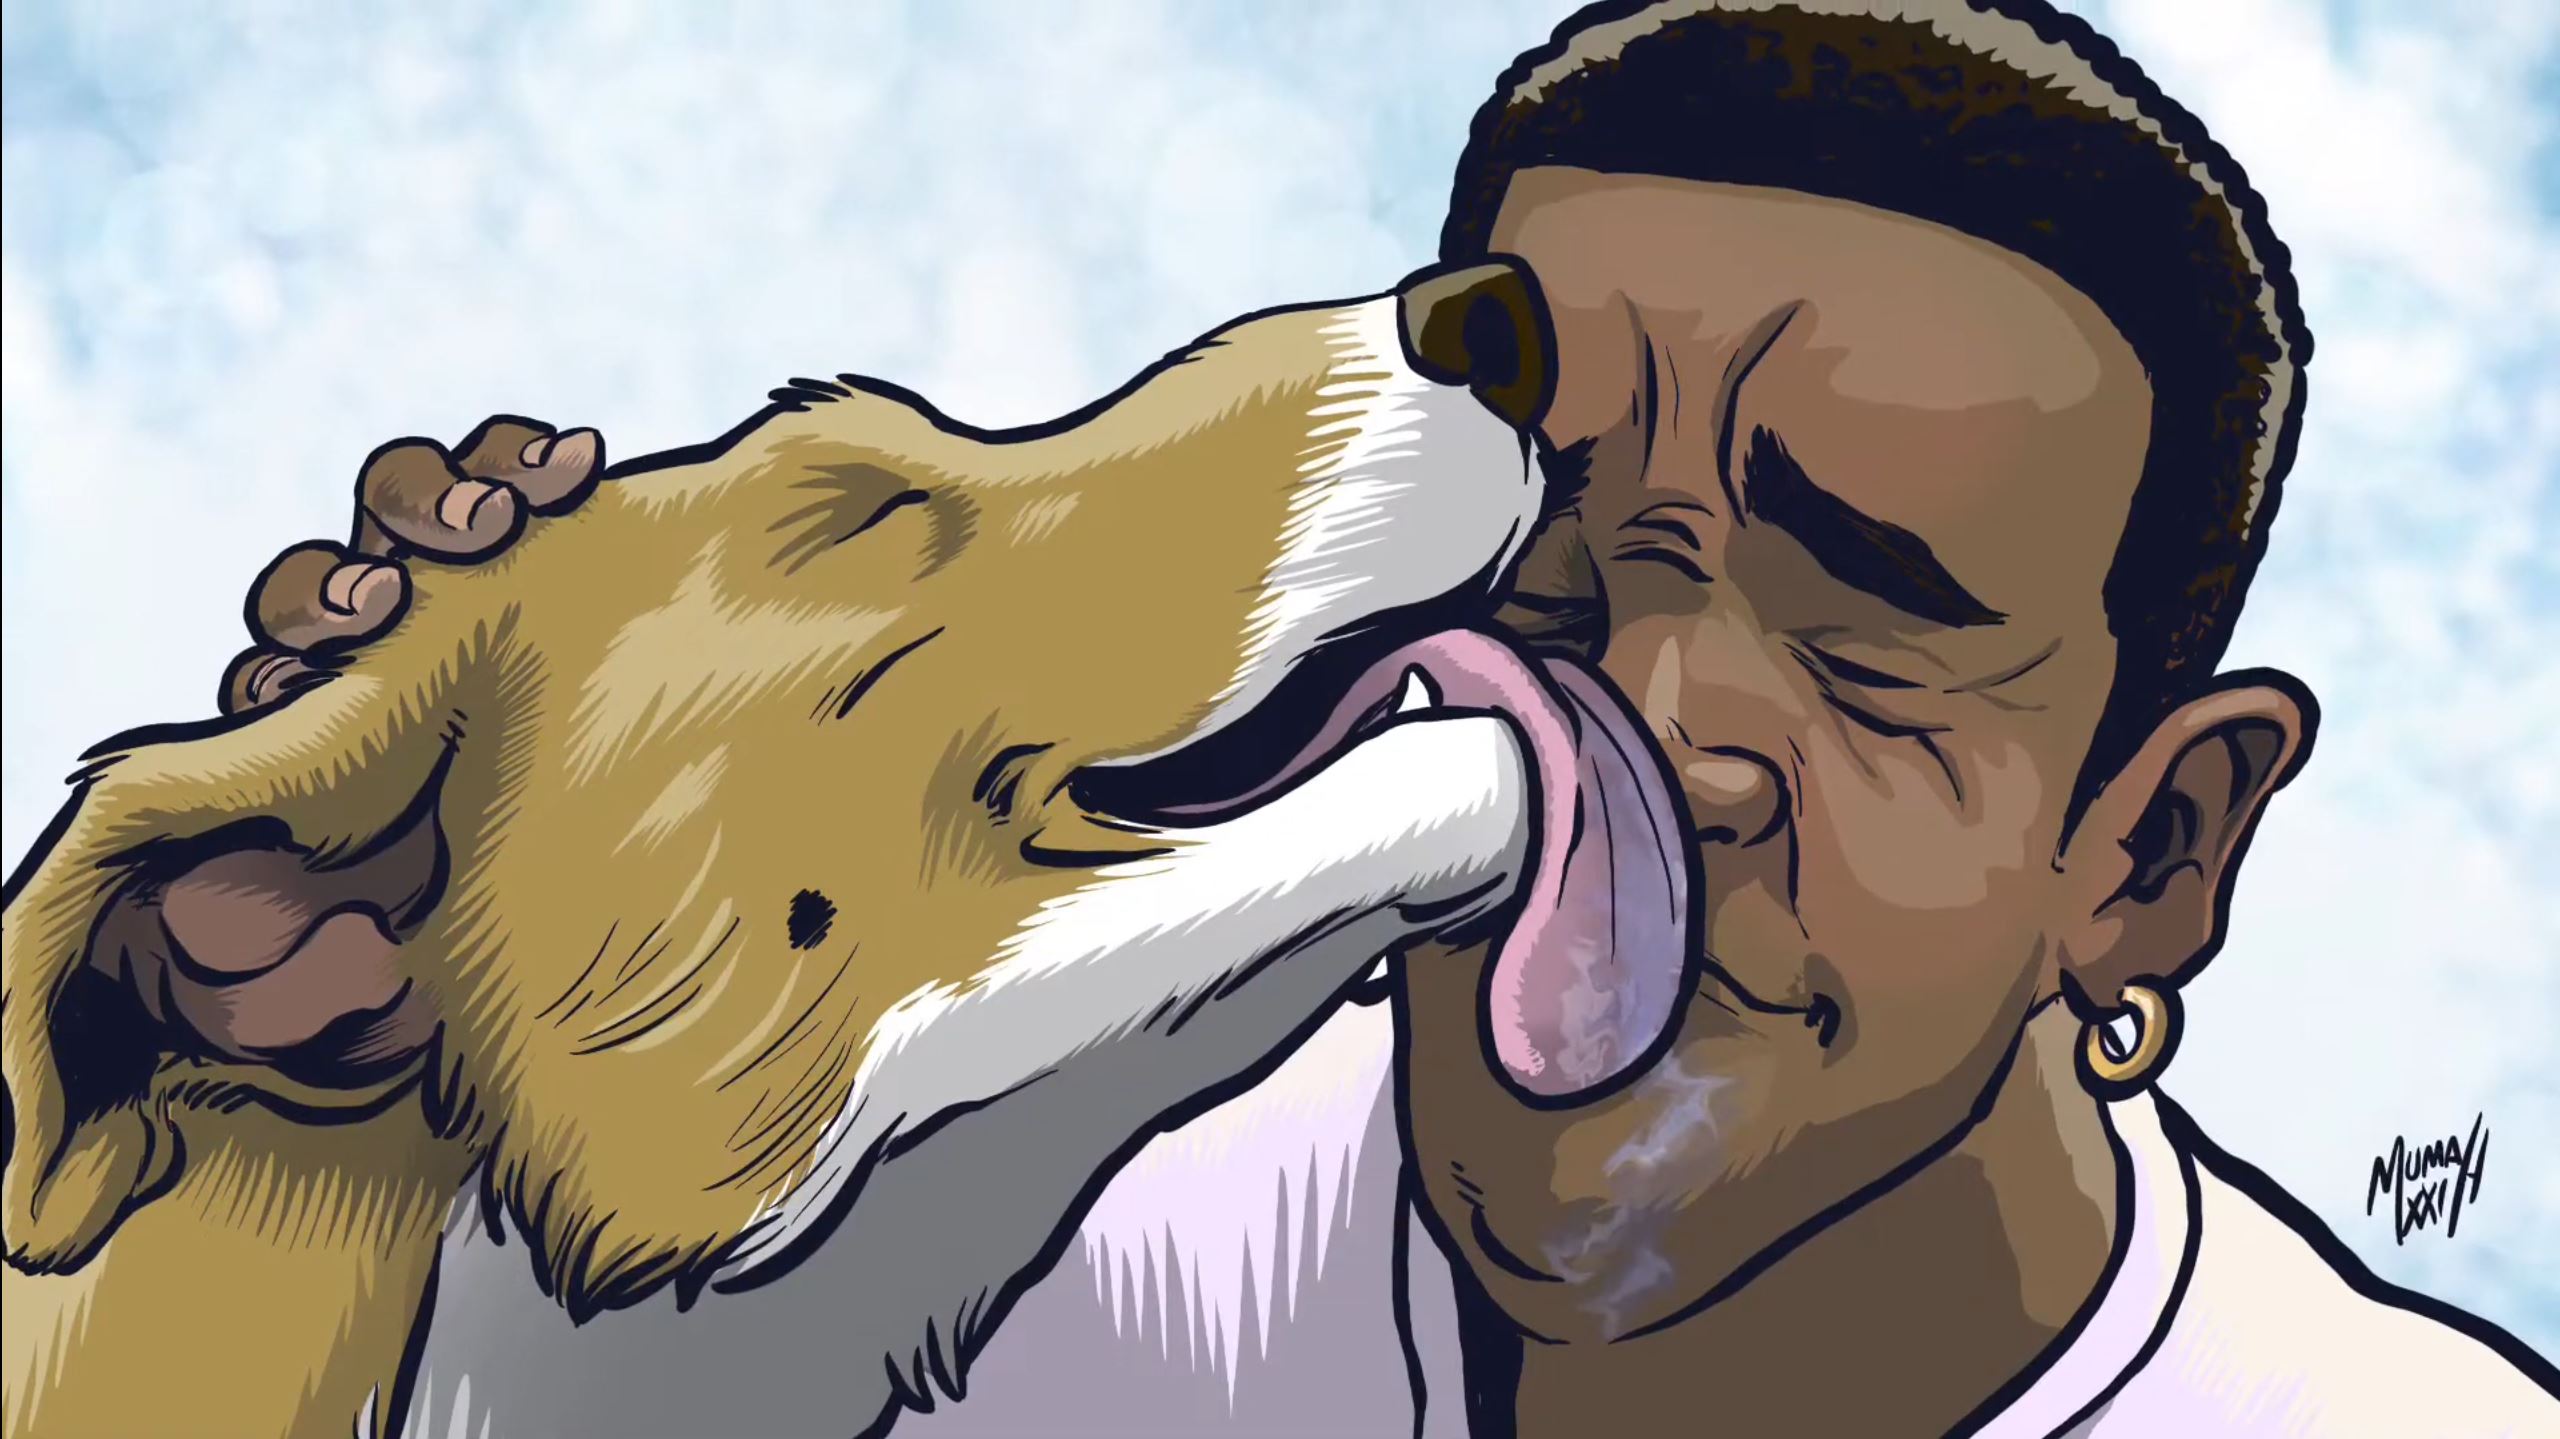 A heckin’ good doggo licks the face it its Black owner. The style is cartoony, with heavy black lines defining the features of its subjects. There’s just a li’l bit of slobber.